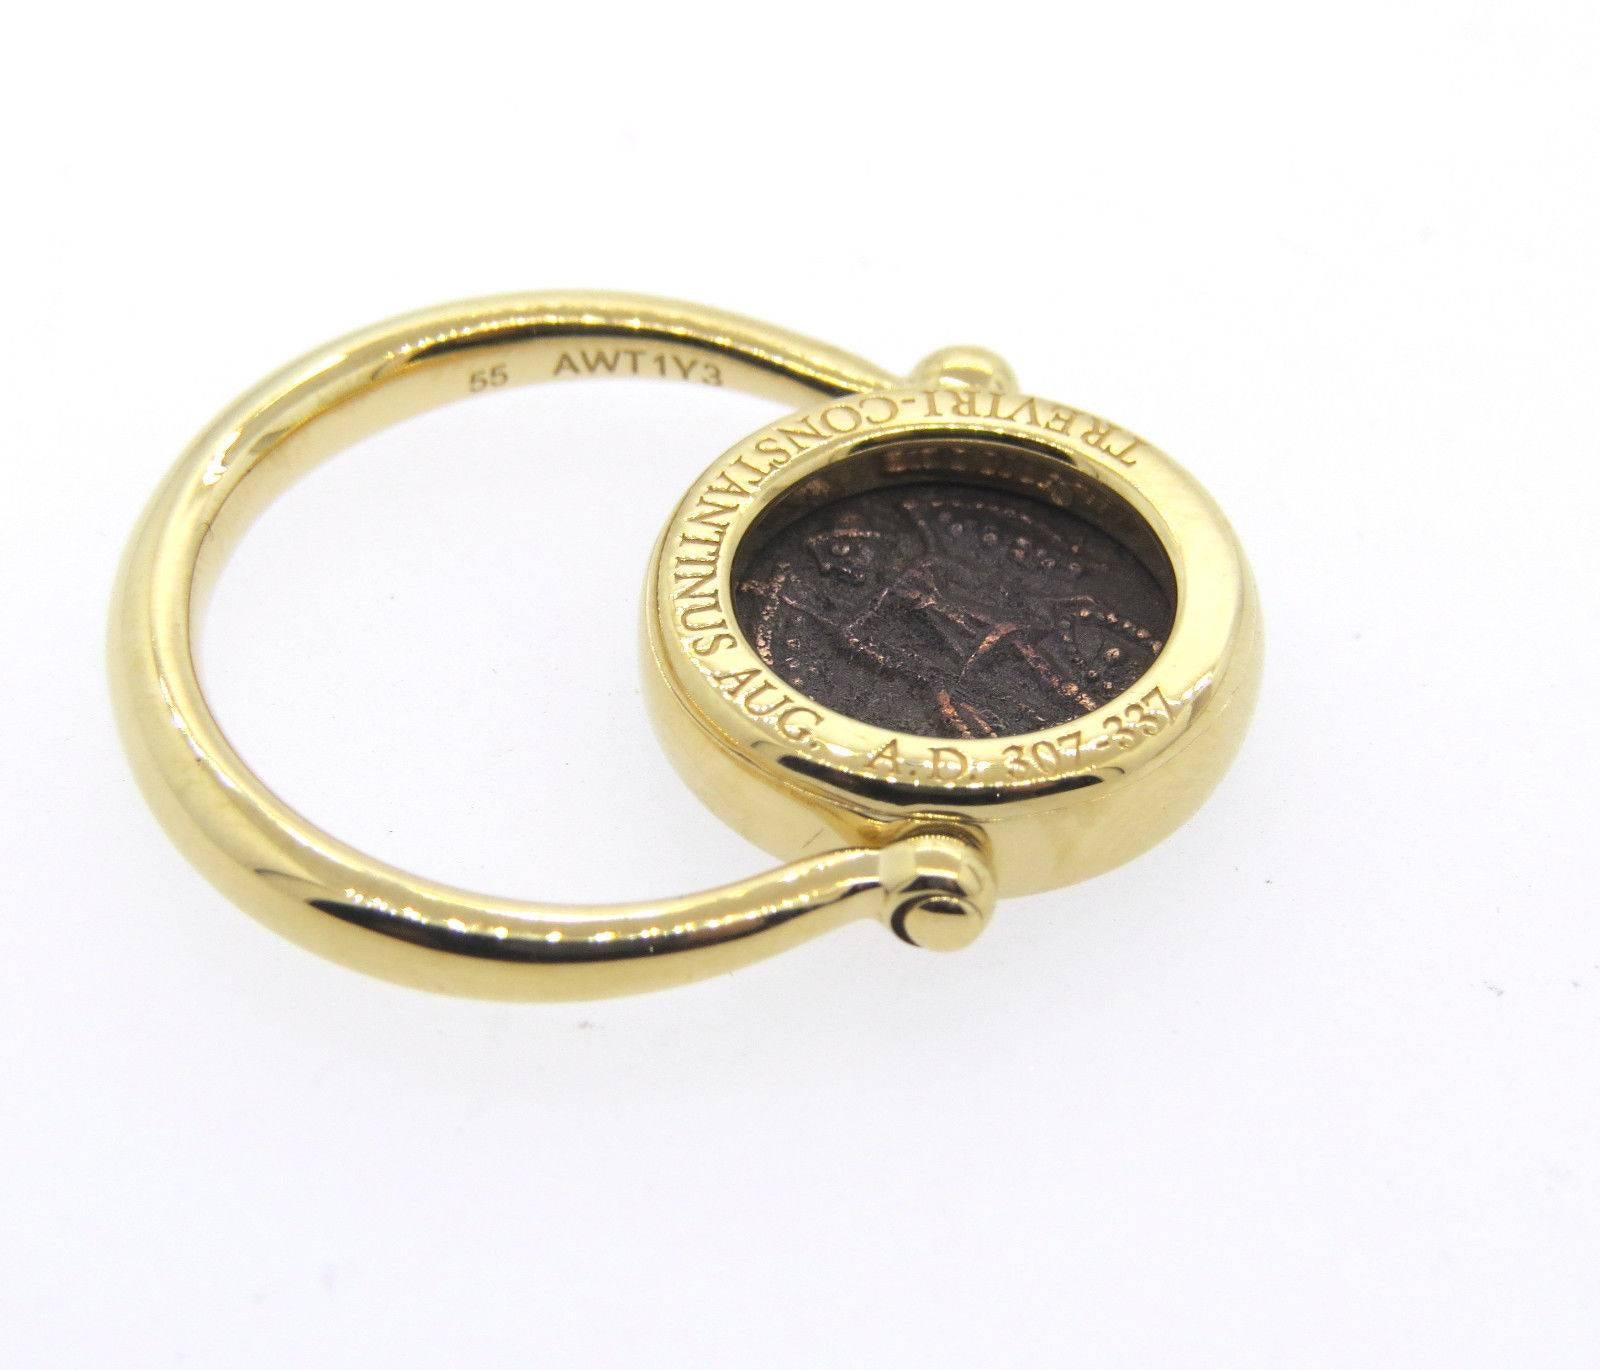 An 18k yellow gold ring set with a bronze ancient coin.  Crafted by Bulgari, the ring is a size 7, ring top is 15mm in diameter.  Marked: Bvlgari, Treviri-Constantinus, Aug A.D. 307-337, 750, made in Italy.  The weight of the ring is 8.3 grams.